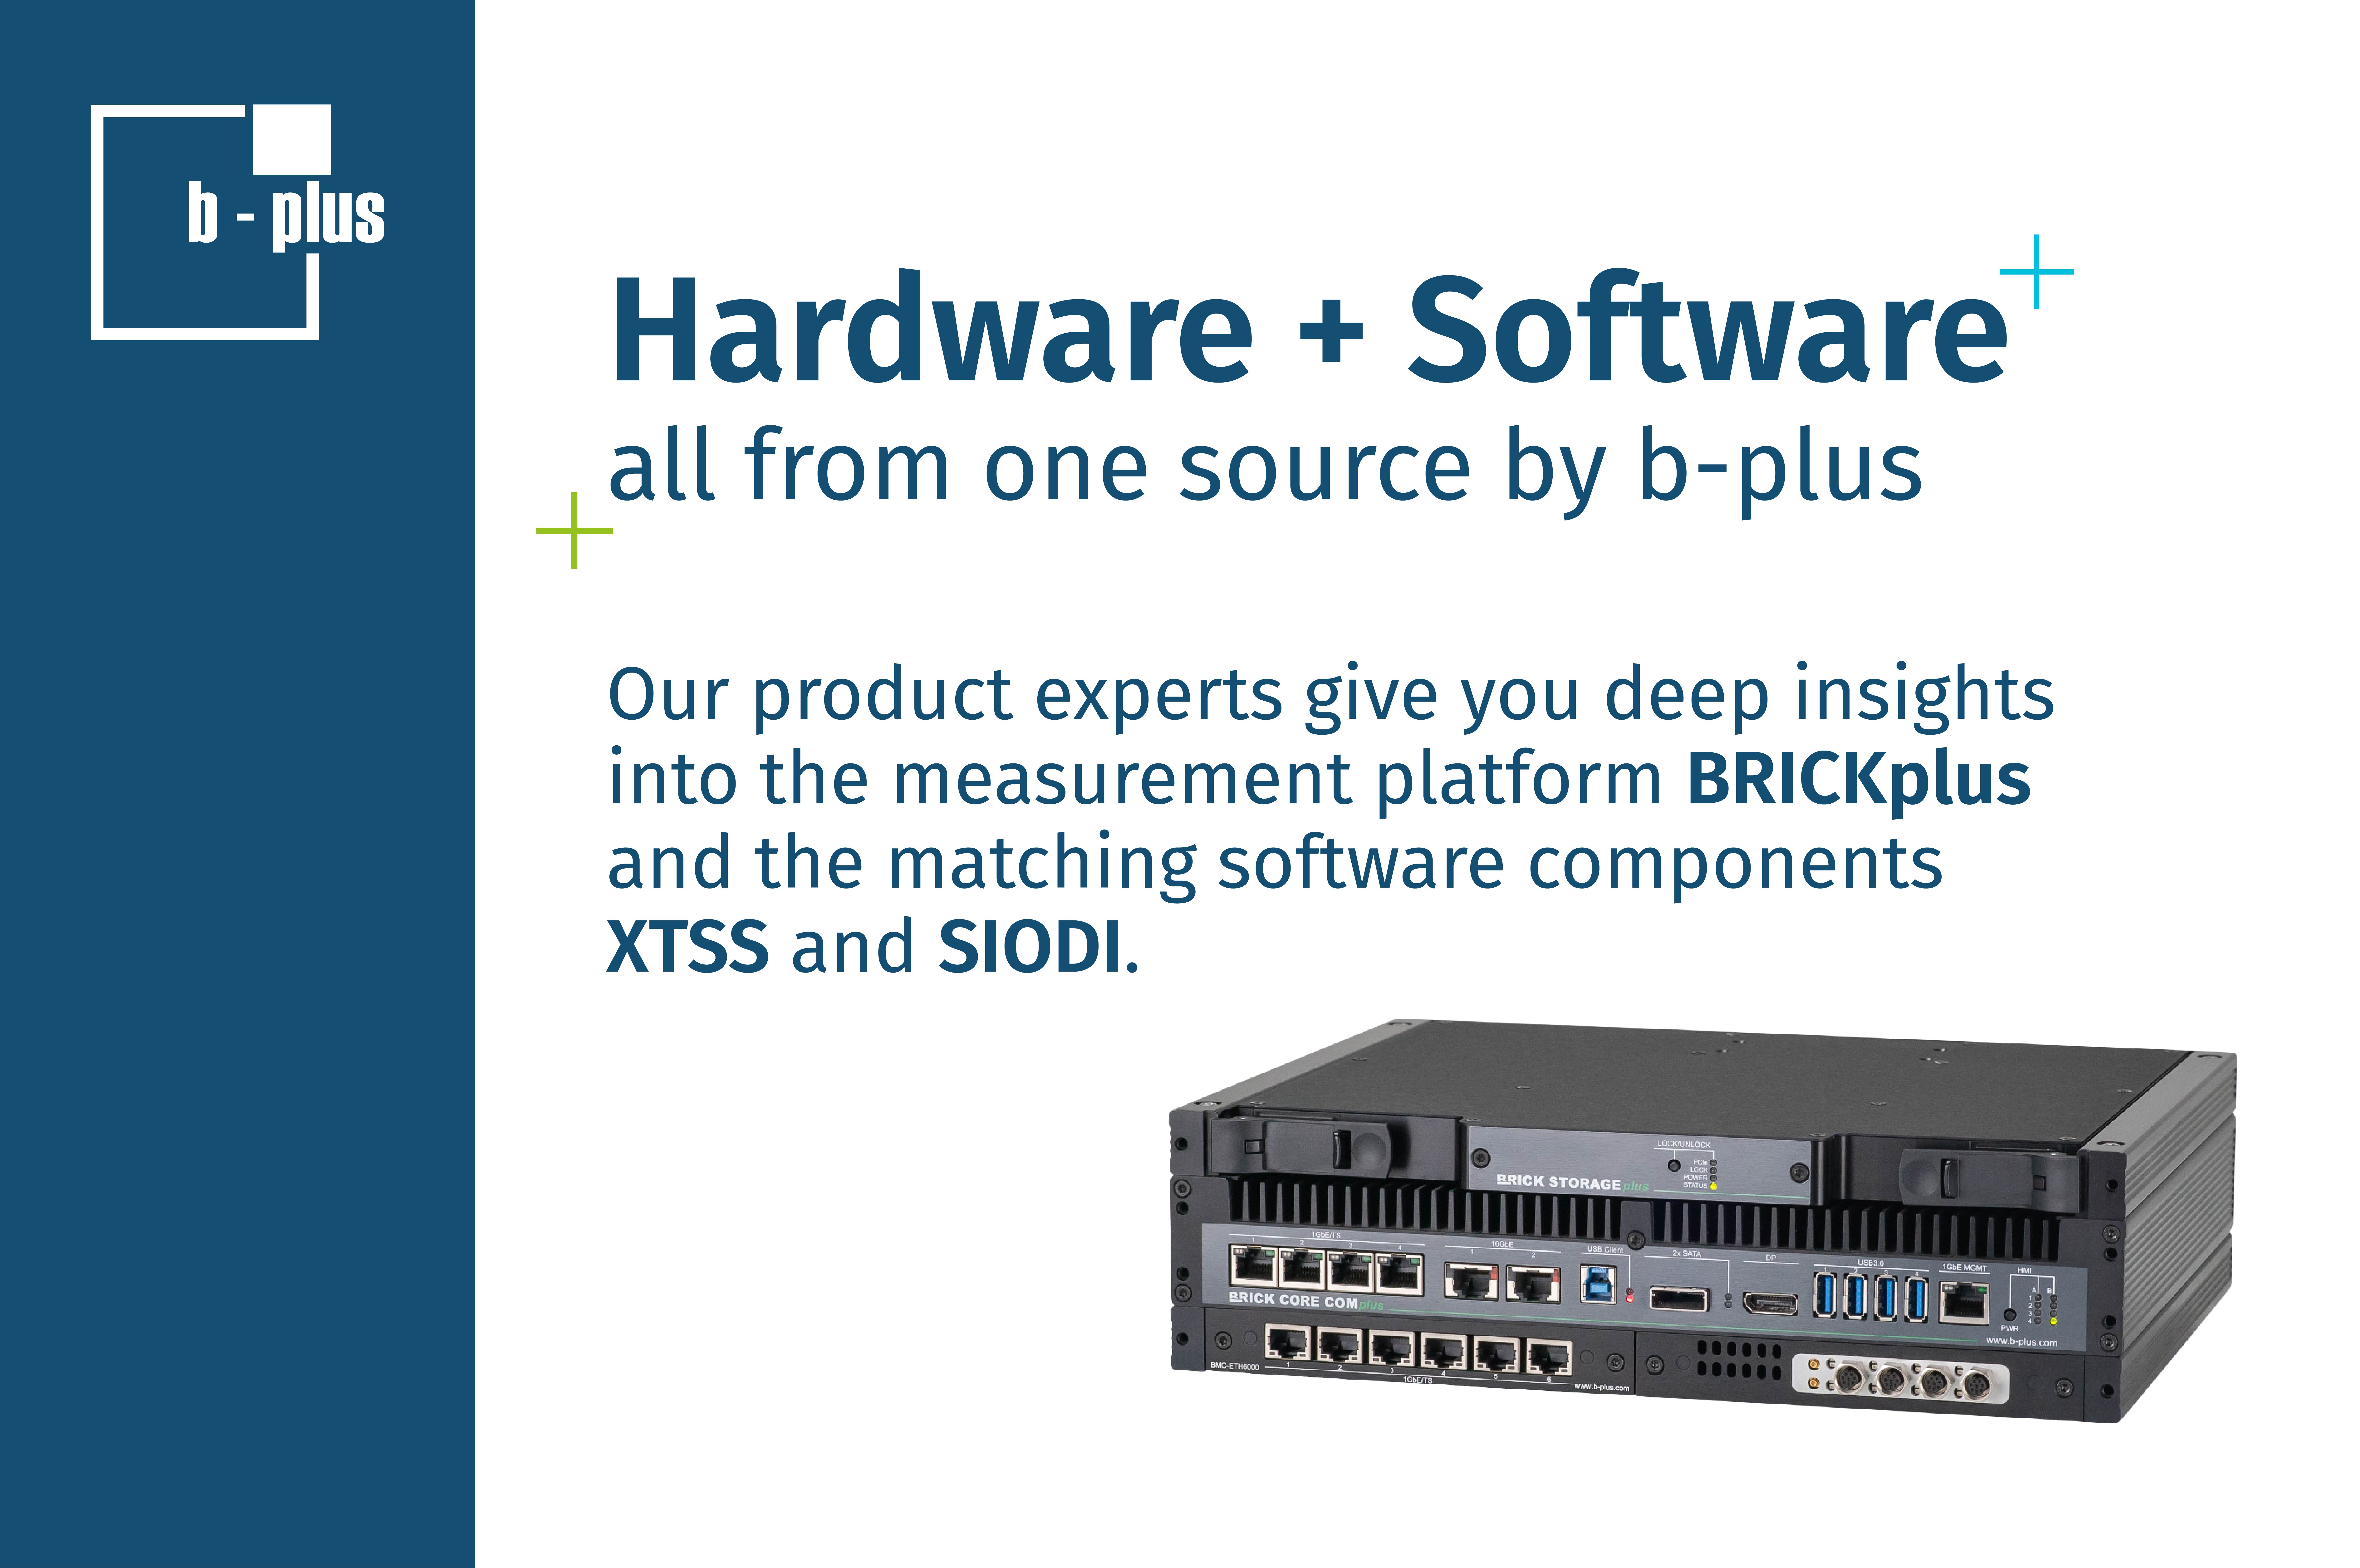 Powerful hardware combined with matching software – all from b-plus